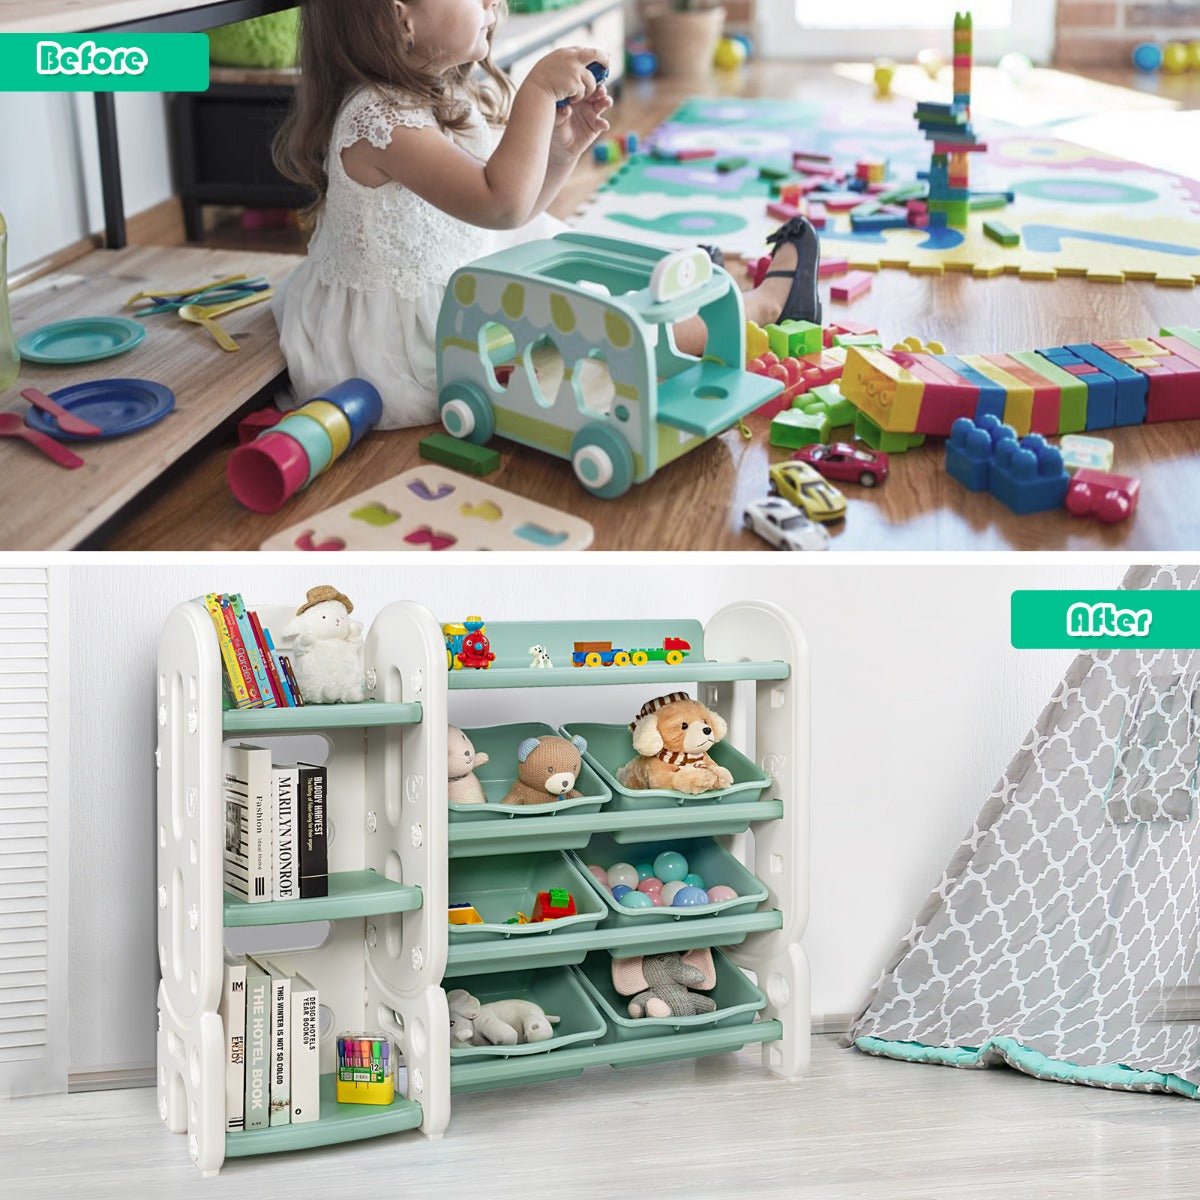 Child's Bedroom Green Toy Storage and Bookshelf - A Balanced Space